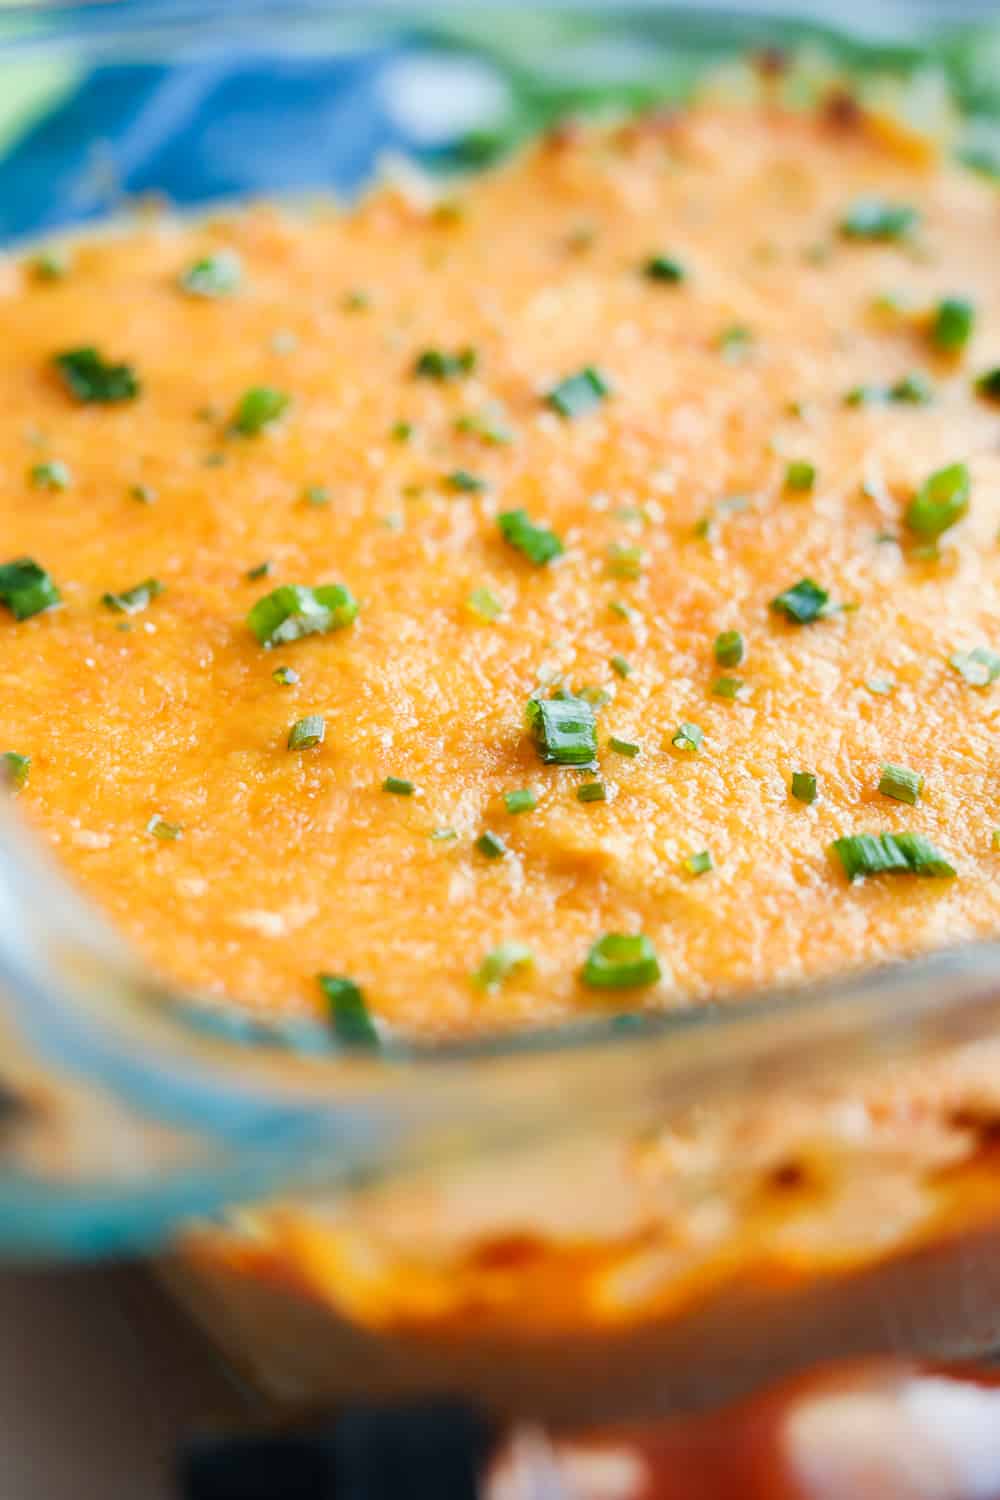 Chicken wing dip in a dish.